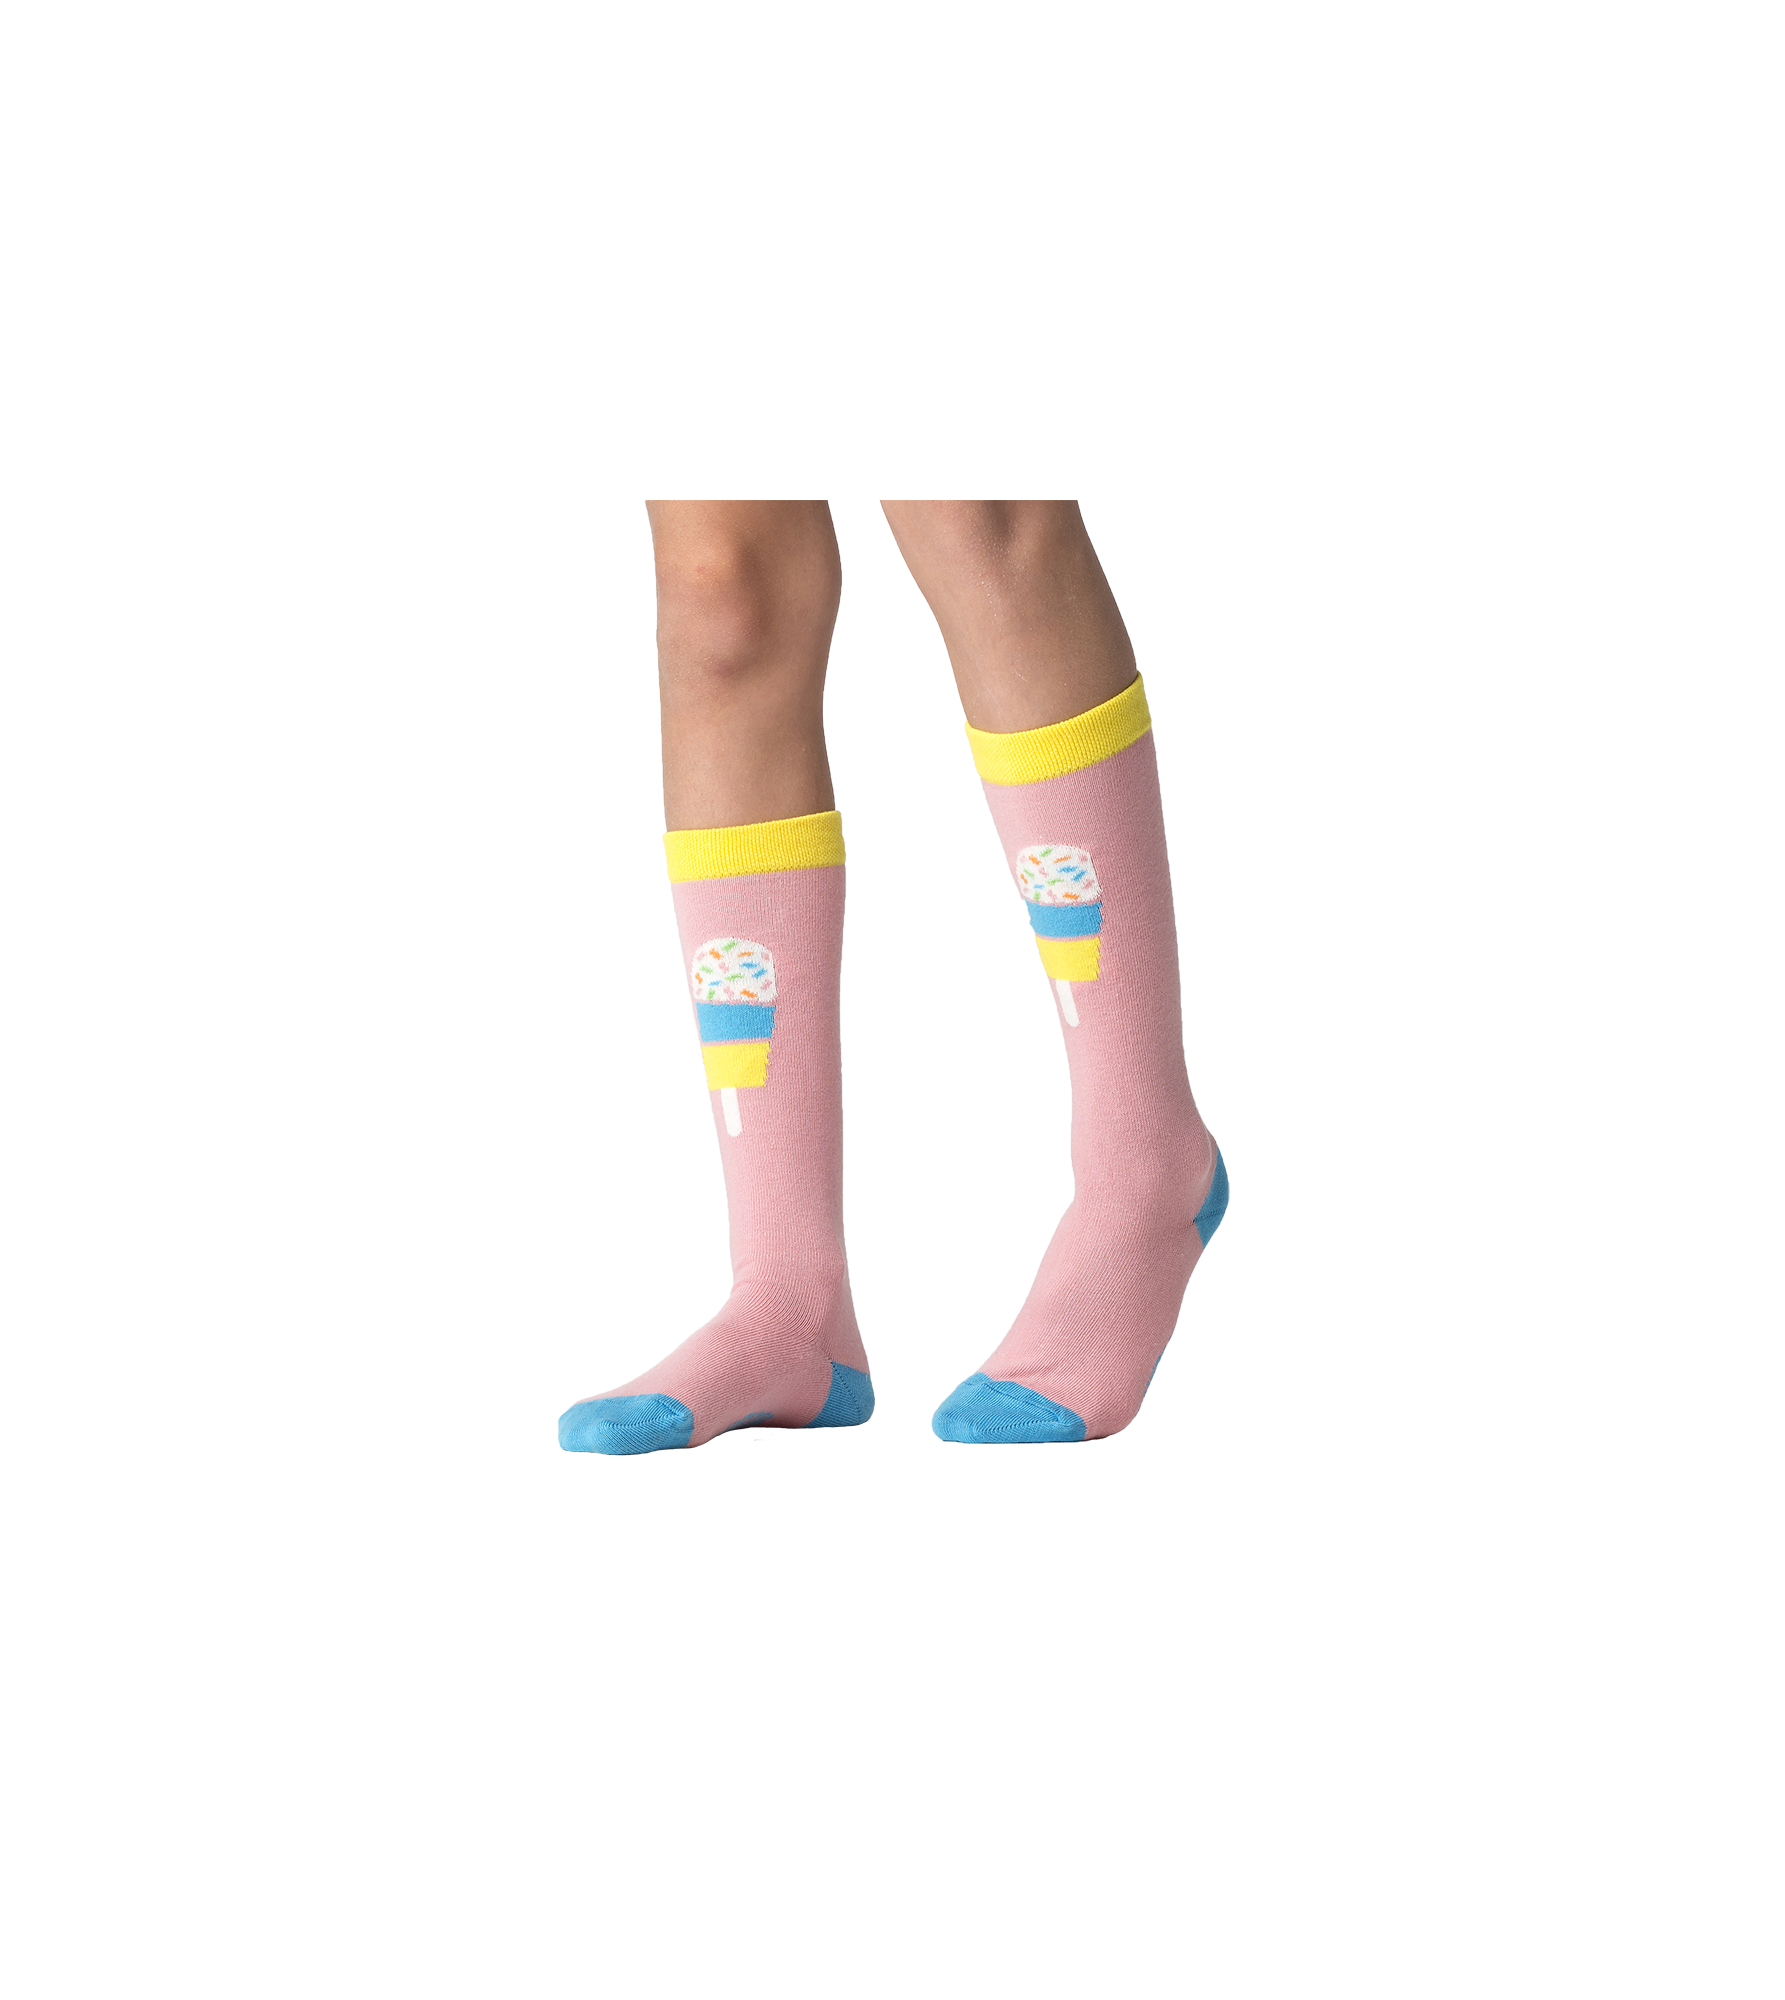 CUTOUT_Lolly Socks.png